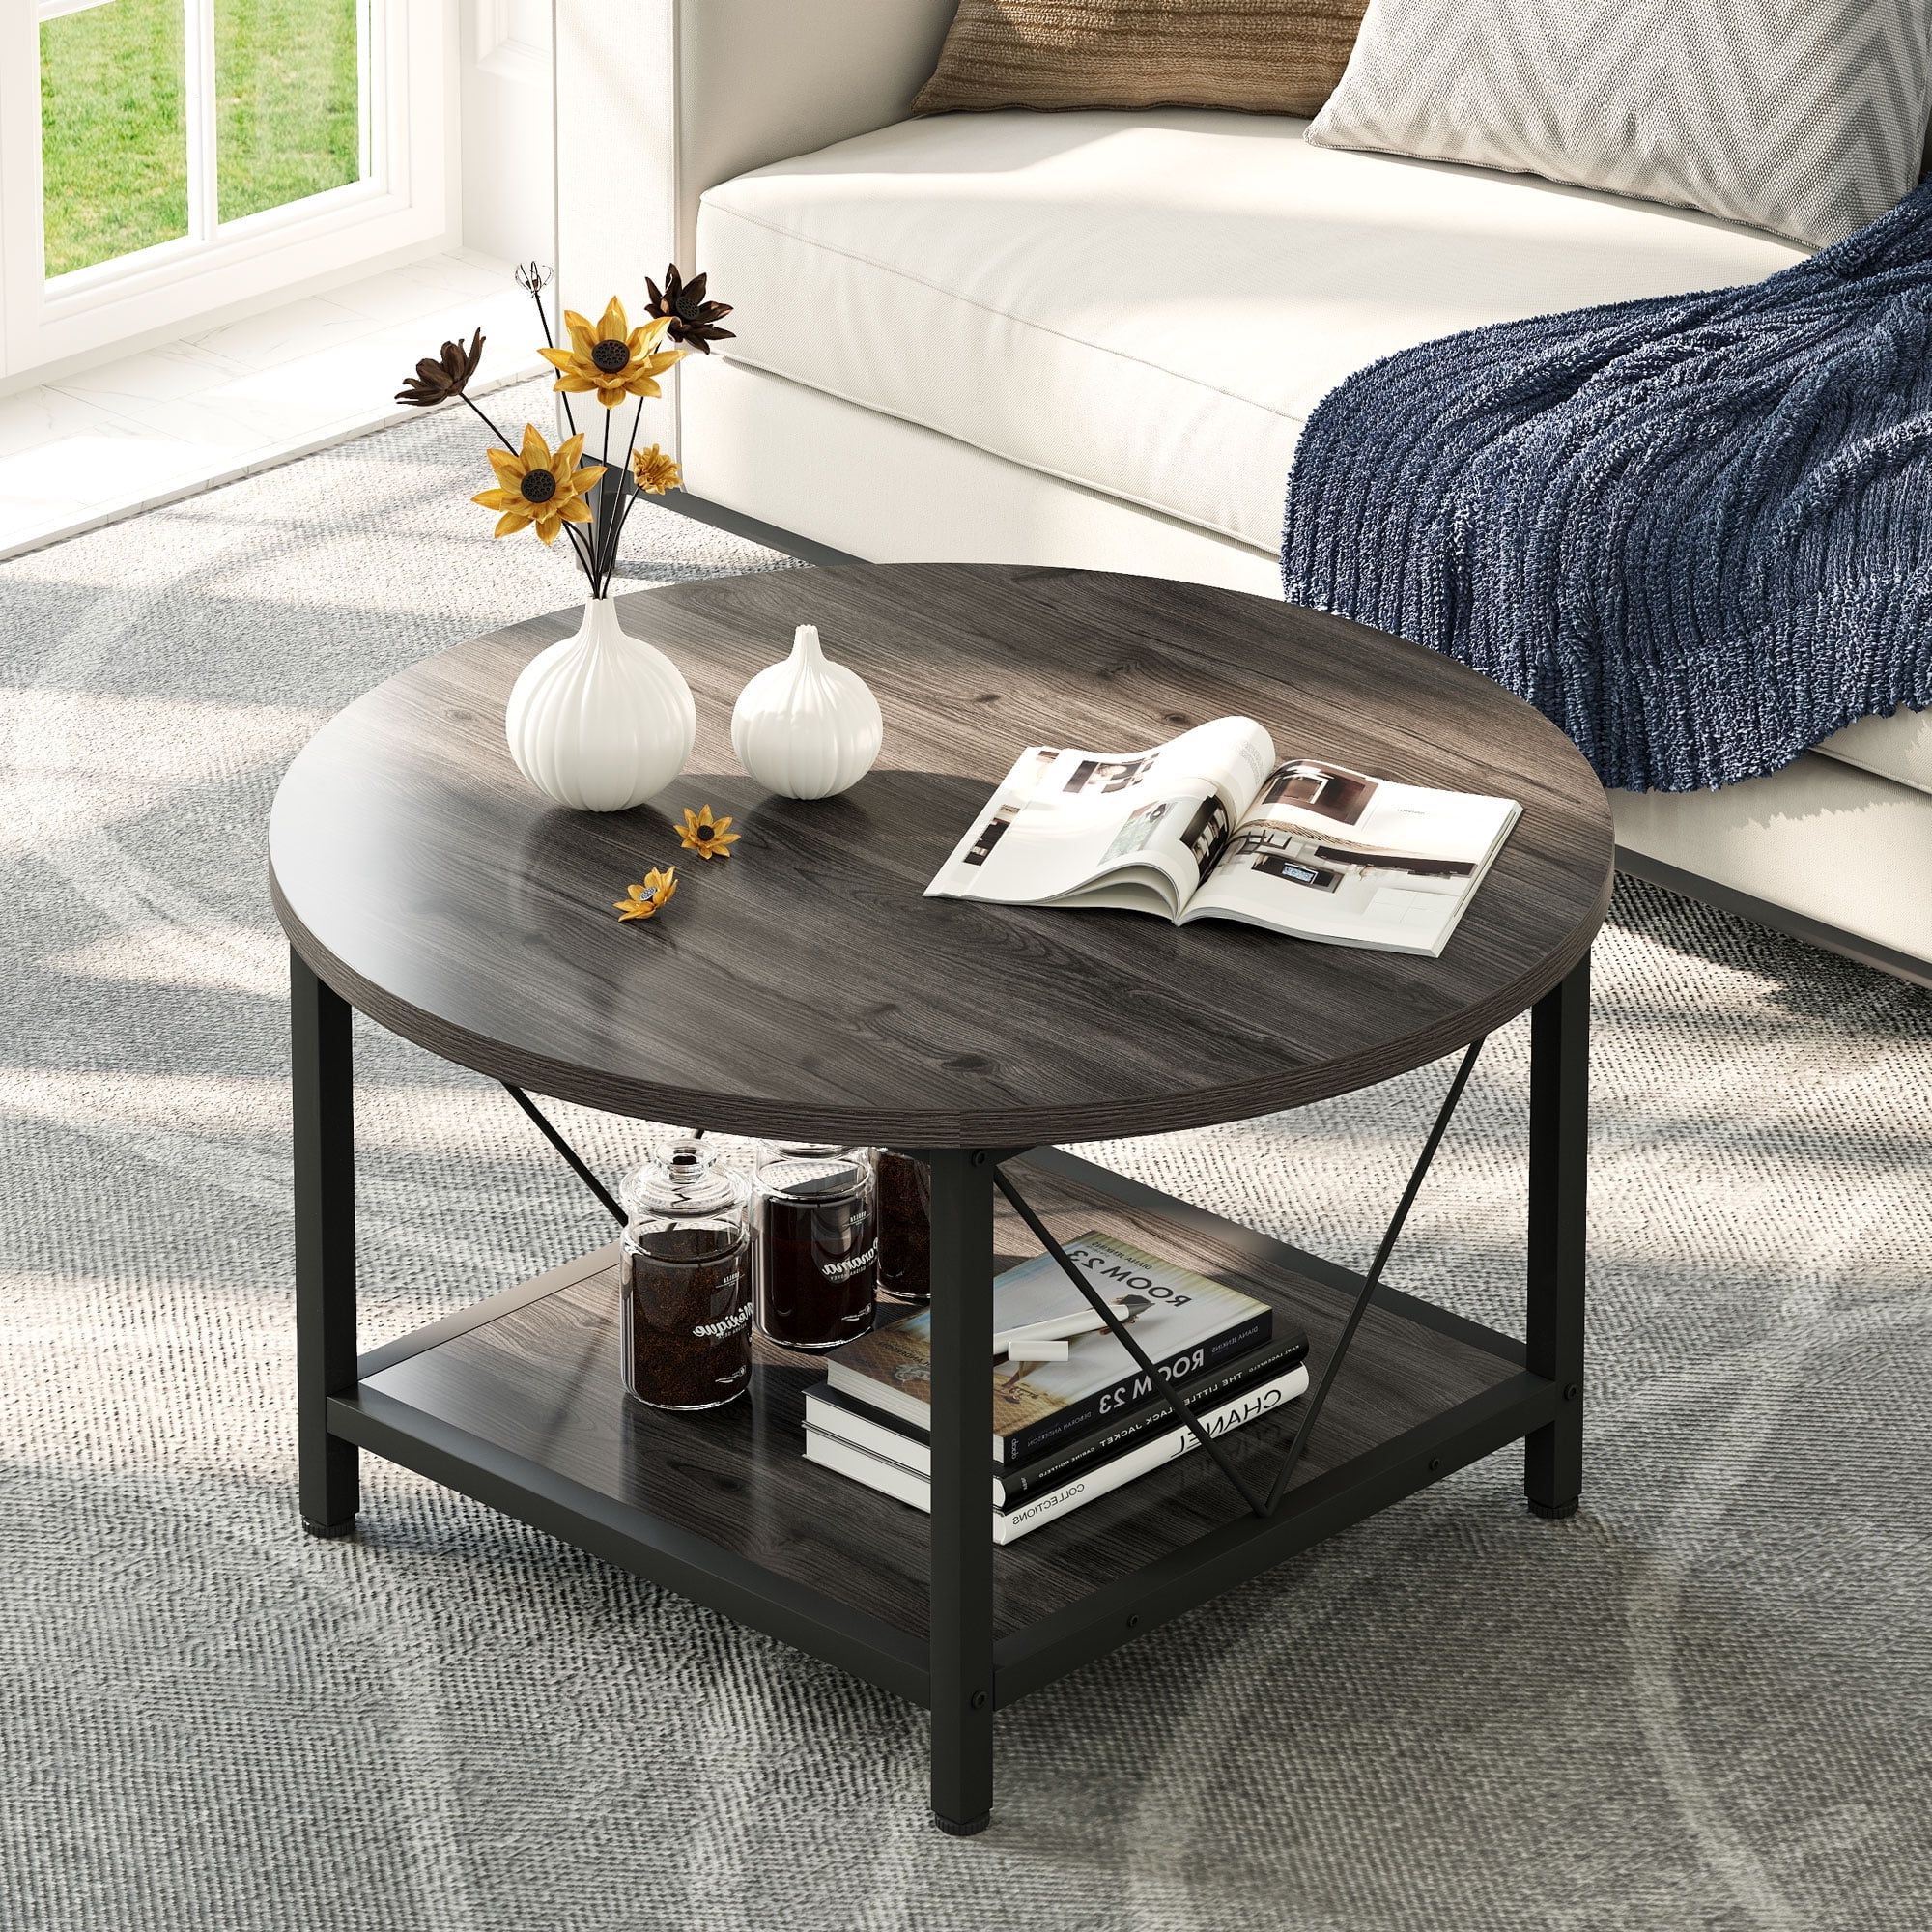 Fashionable Round Coffee Tables With Storage Pertaining To Dextrus Round Coffee Table With Storage, Rustic Living Room Tables With  Sturdy Metal Legs, Dark Gray – Walmart (View 4 of 10)